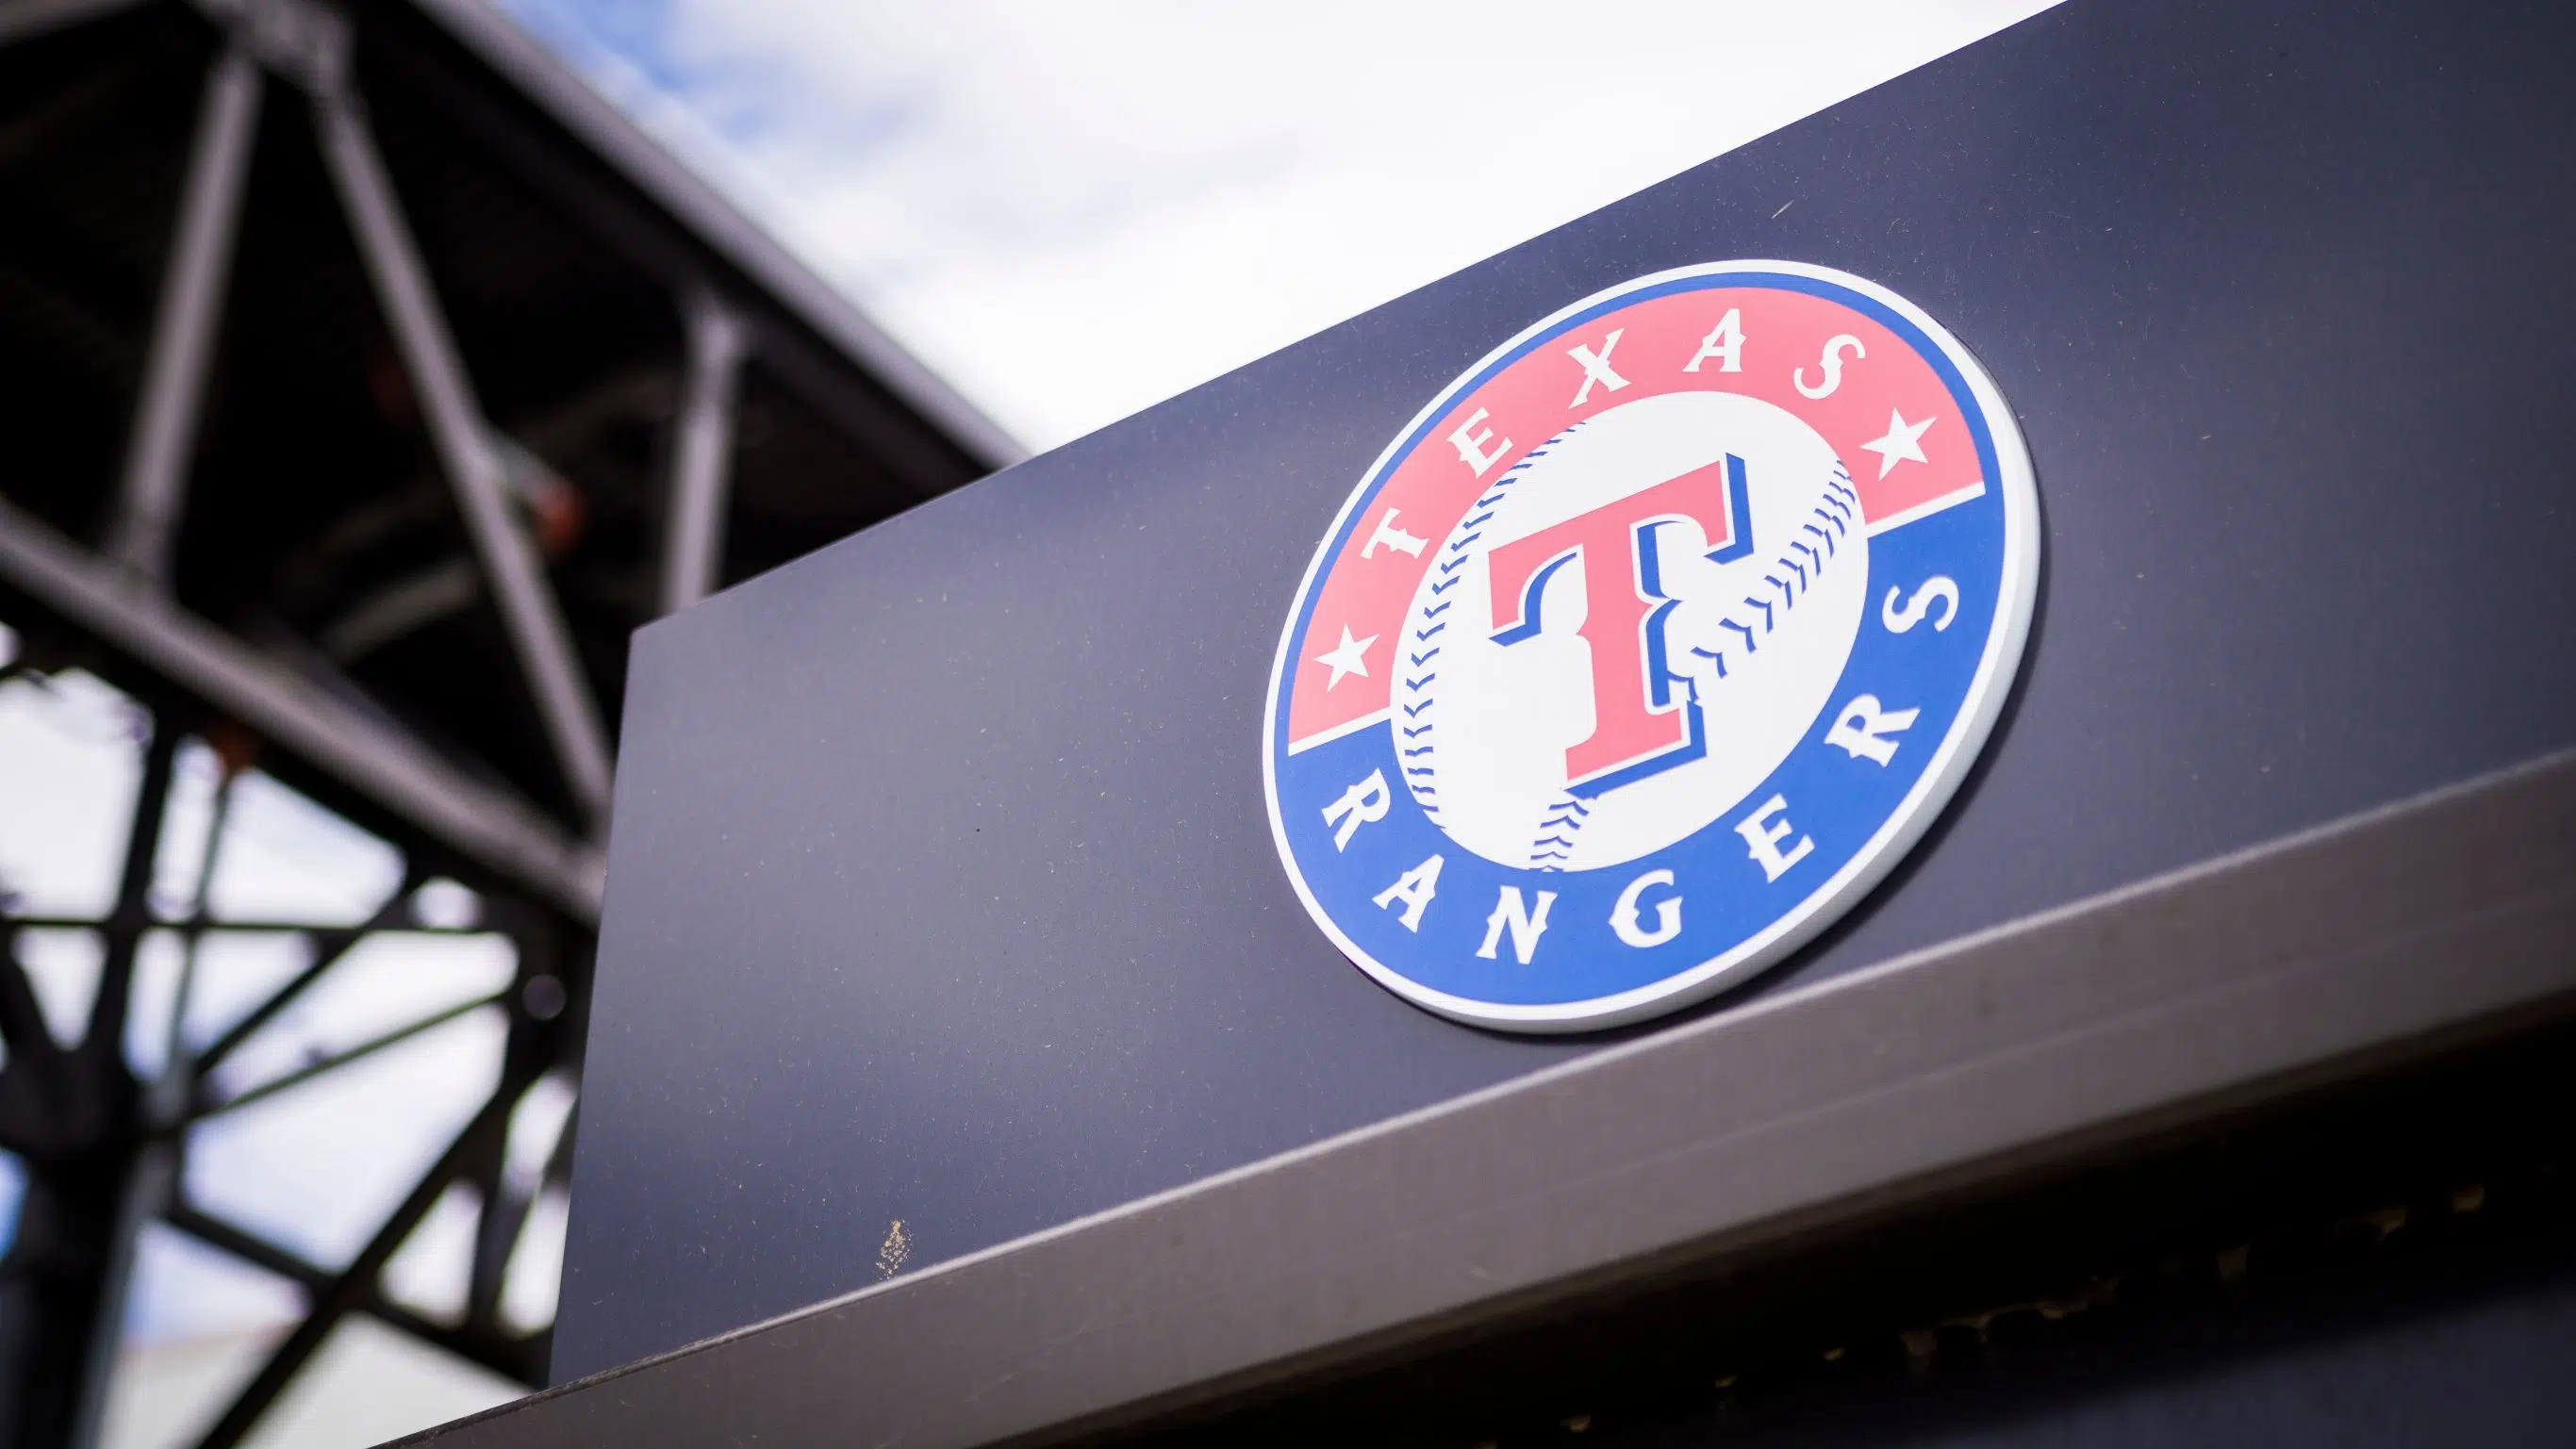 Texas Rangers Secure First World Series Title in Franchise History